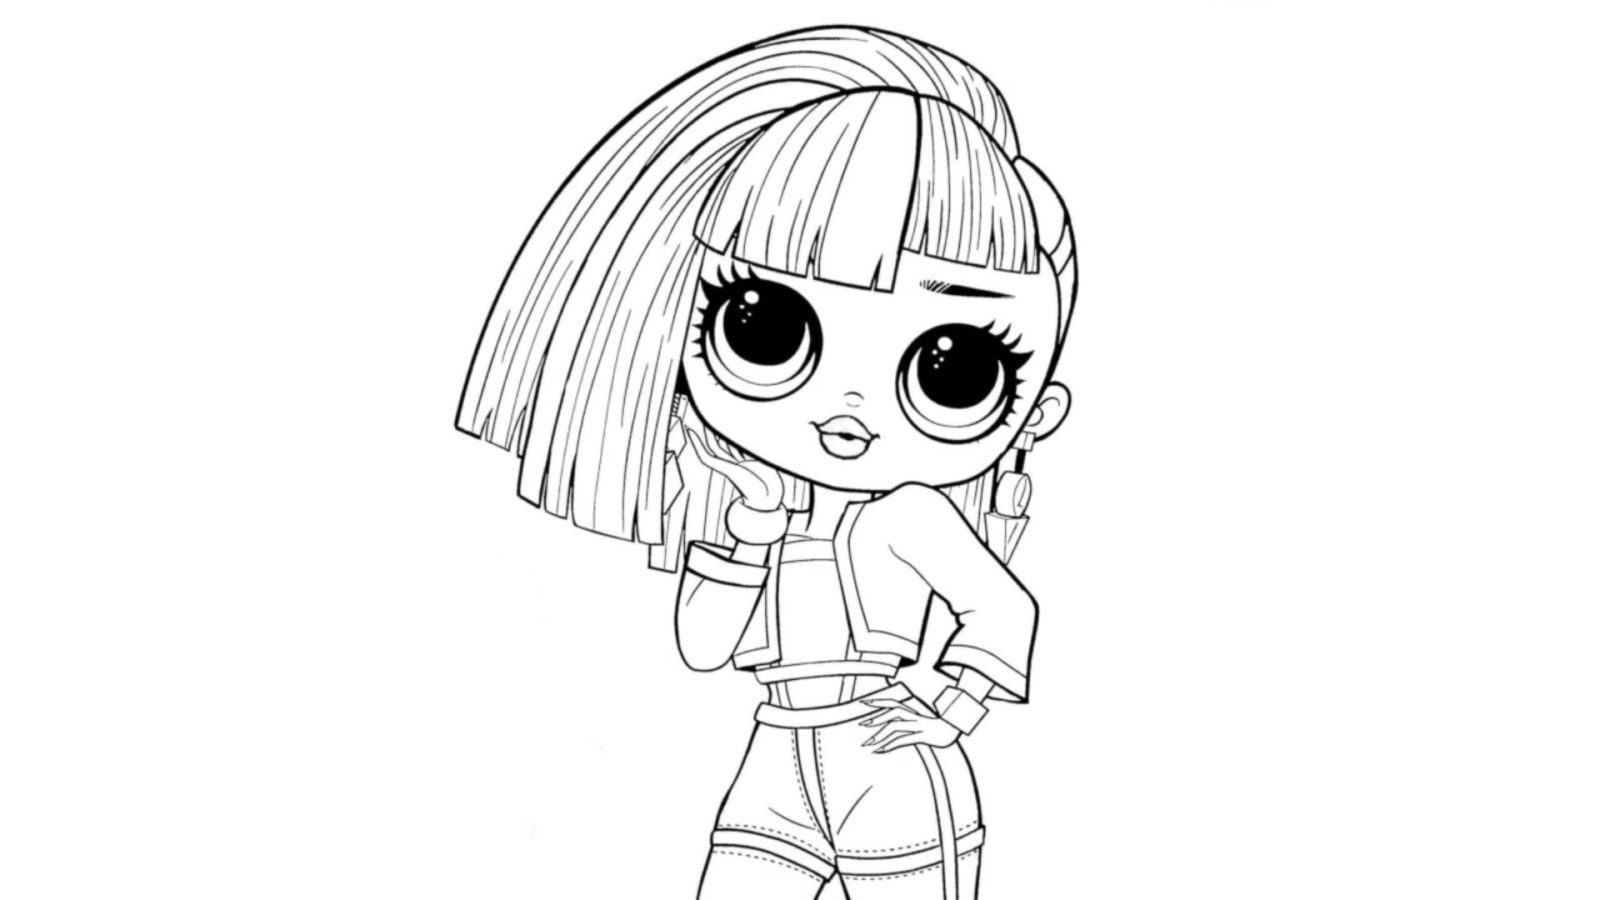 Lol Omg Lady Diva Coloring Pages - Coloring and Drawing